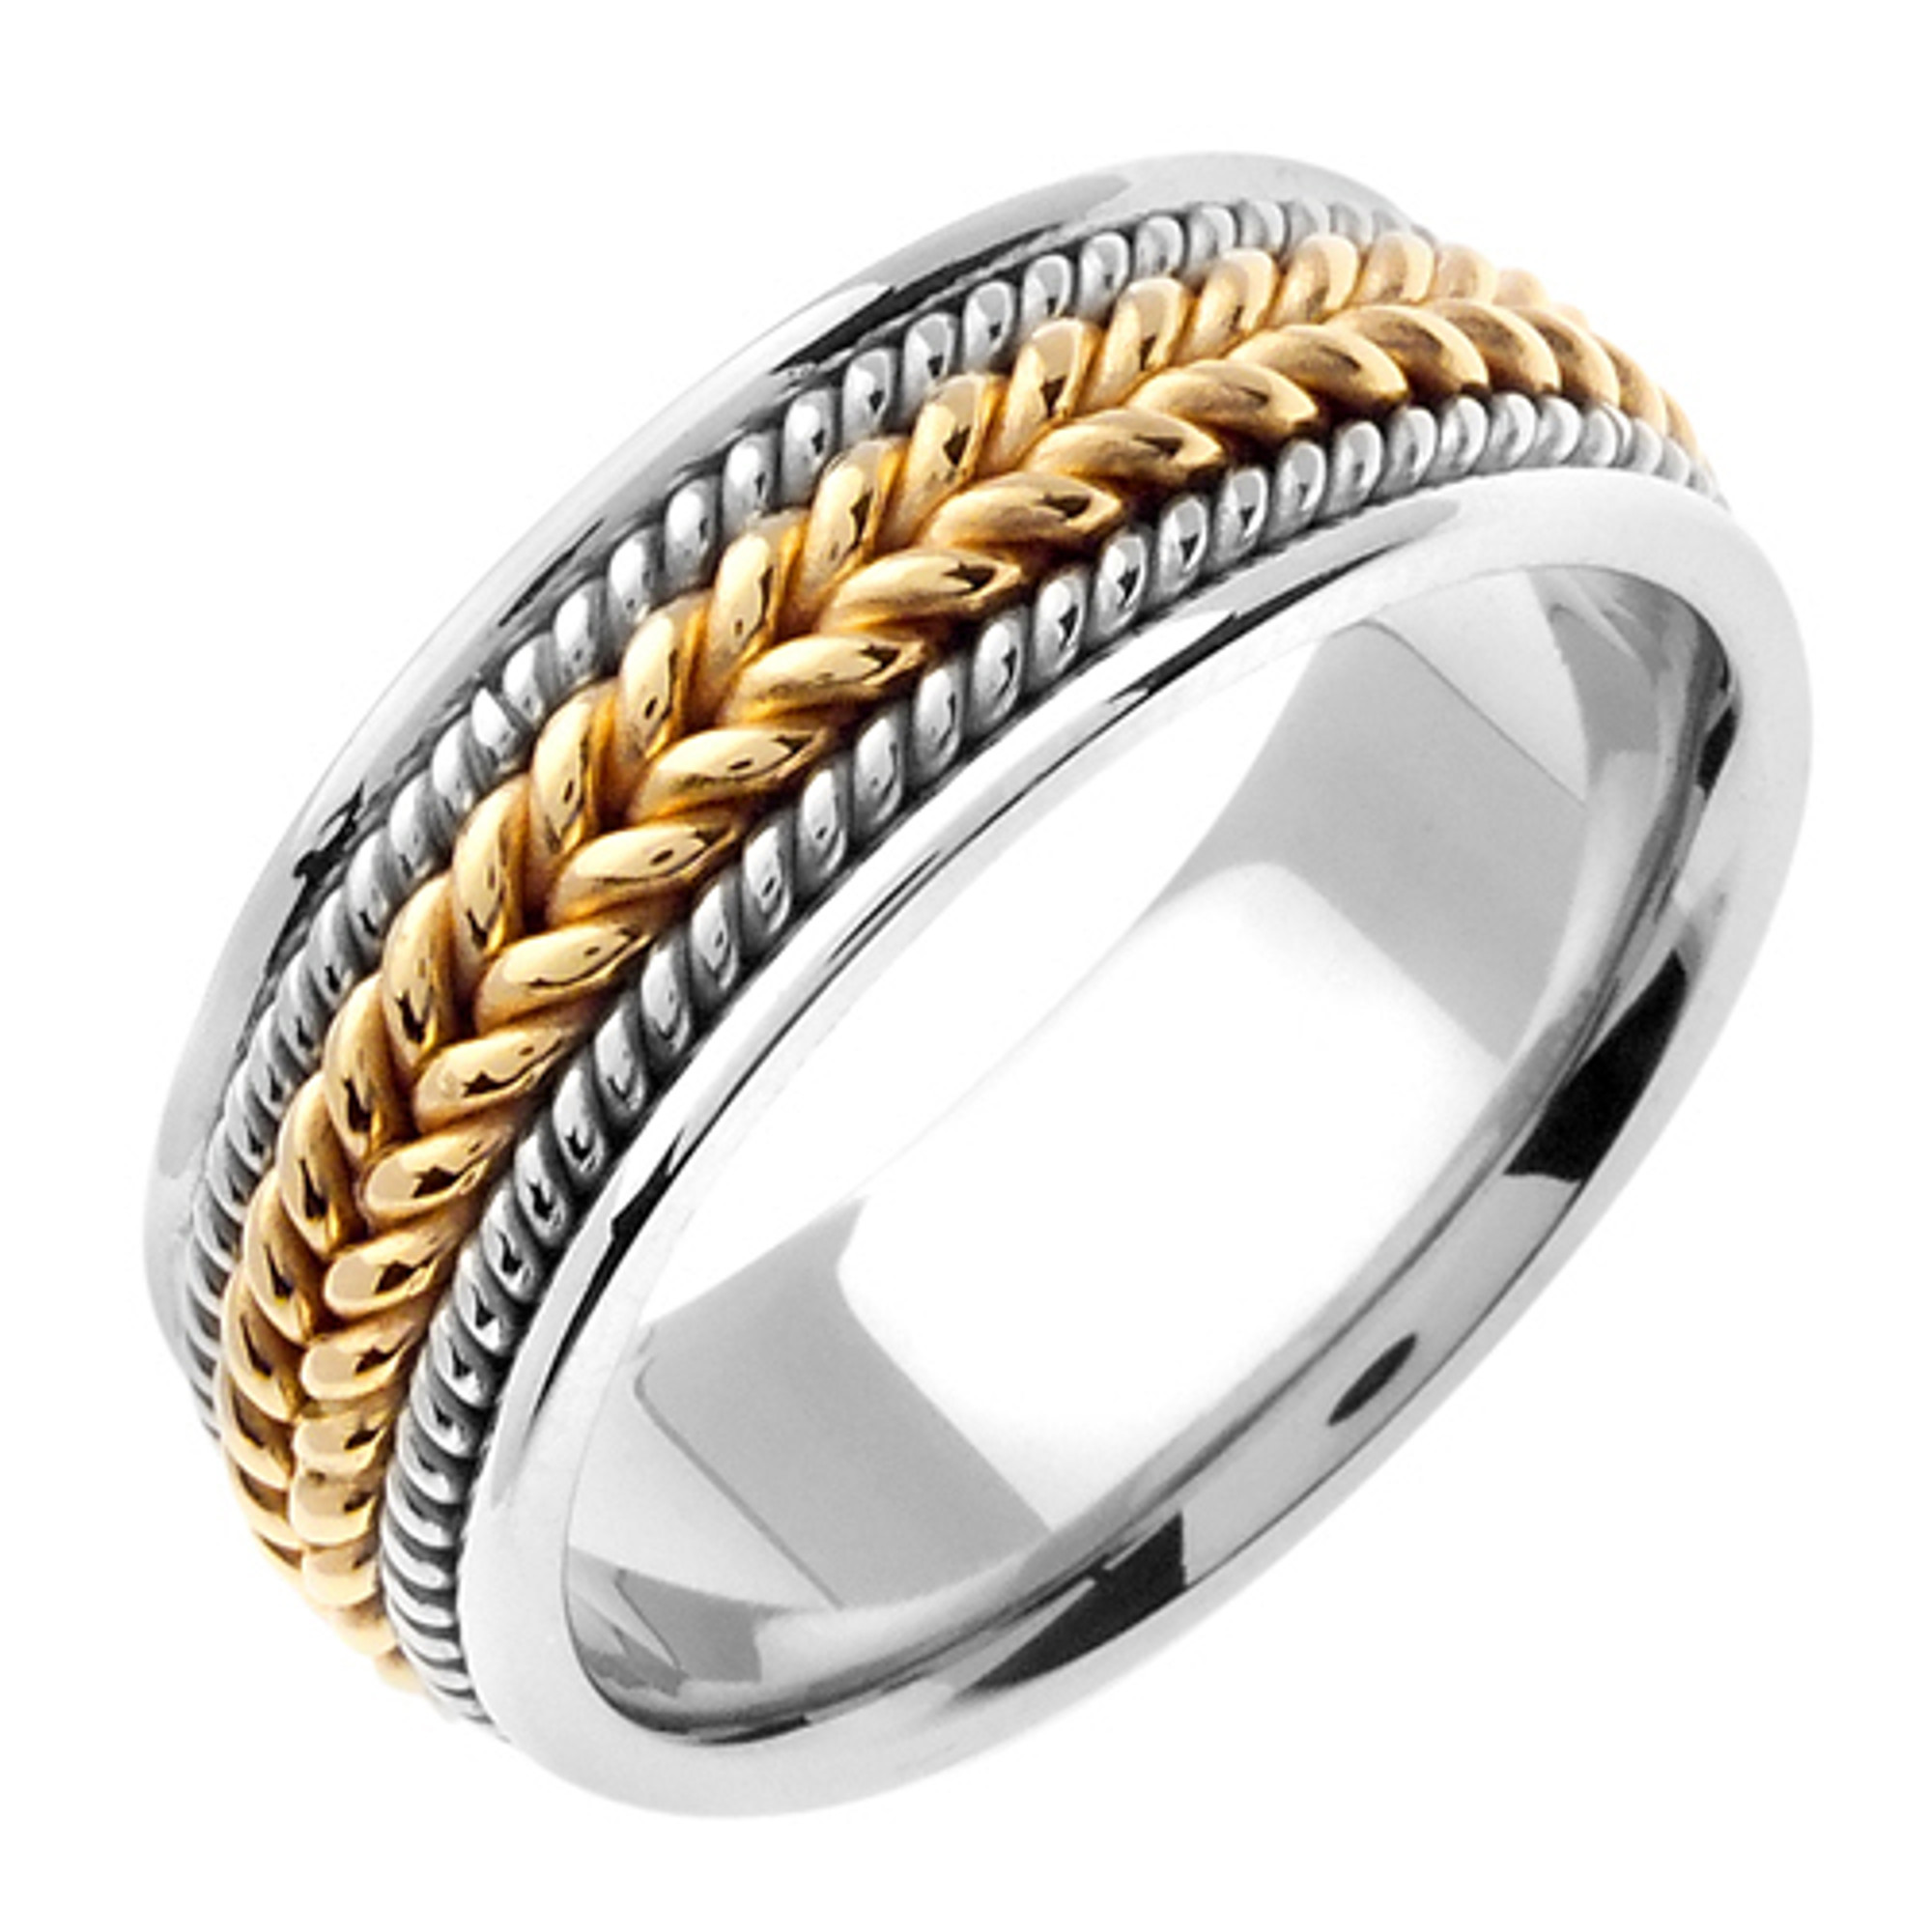 18k White Gold With Yellow Gold 8mm Wide Handmade Braided Wedding Band